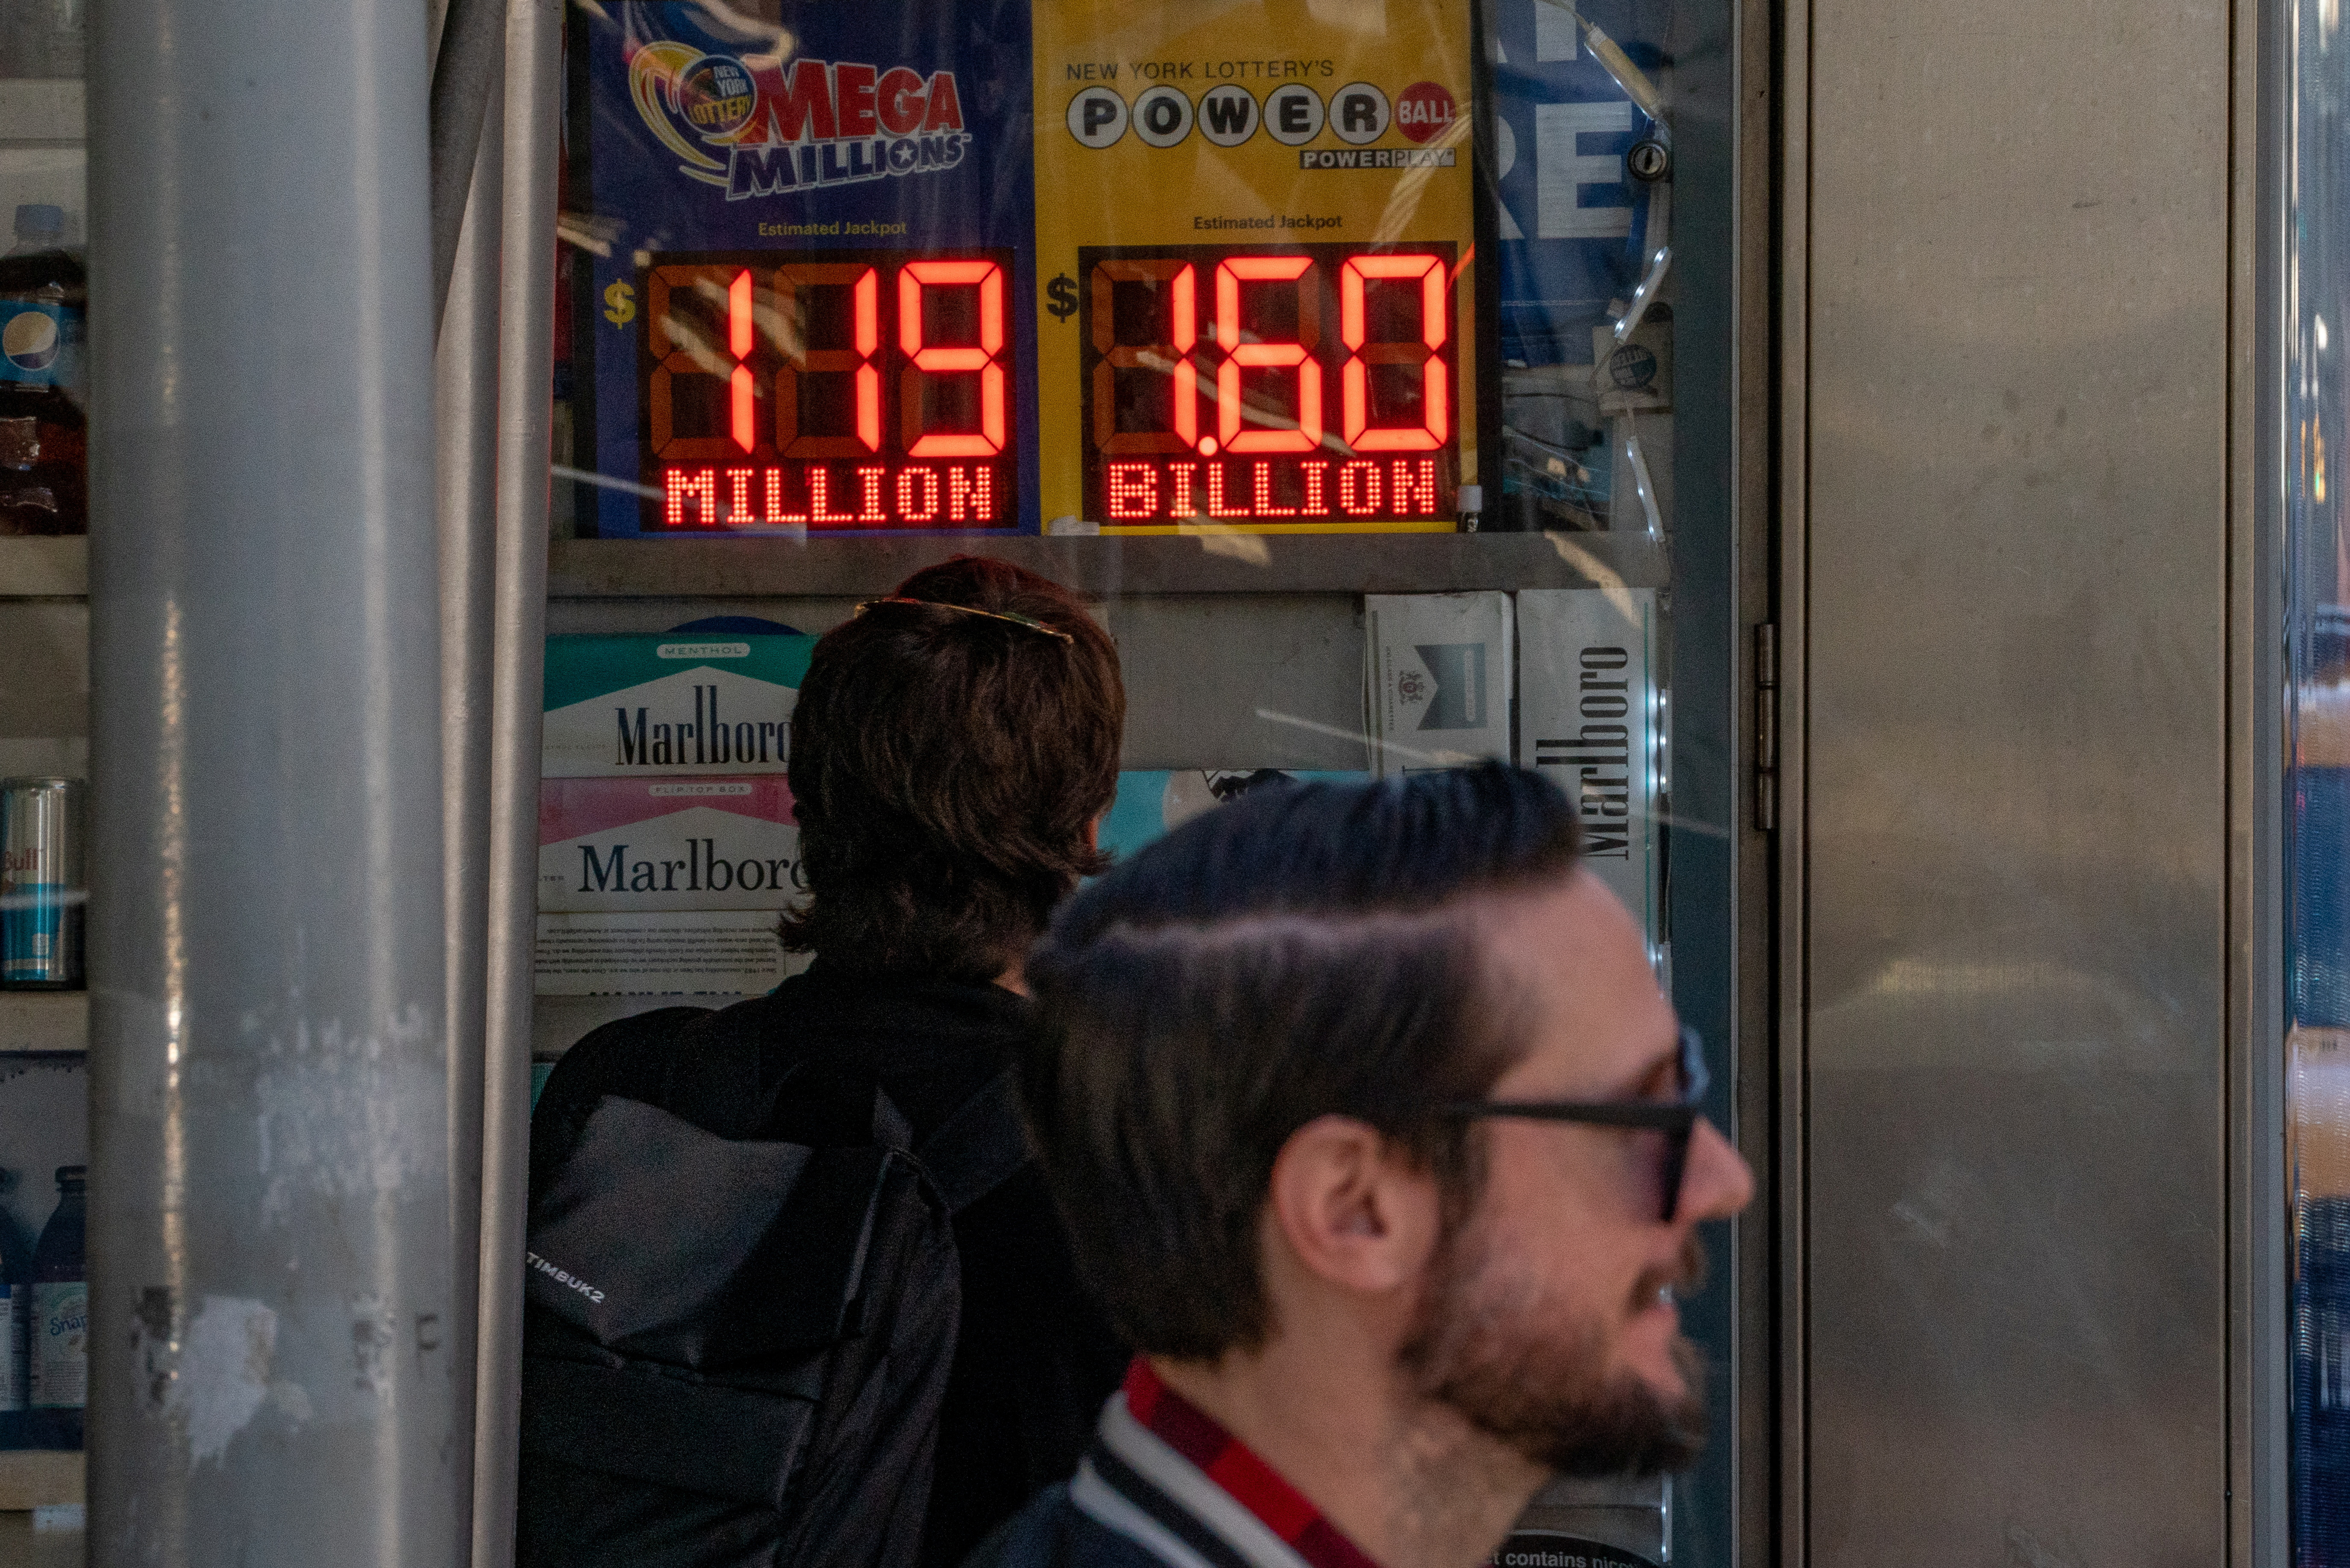 A person looks at a digital billboard announcing the $1.6 billion Powerball jackpot in New York City